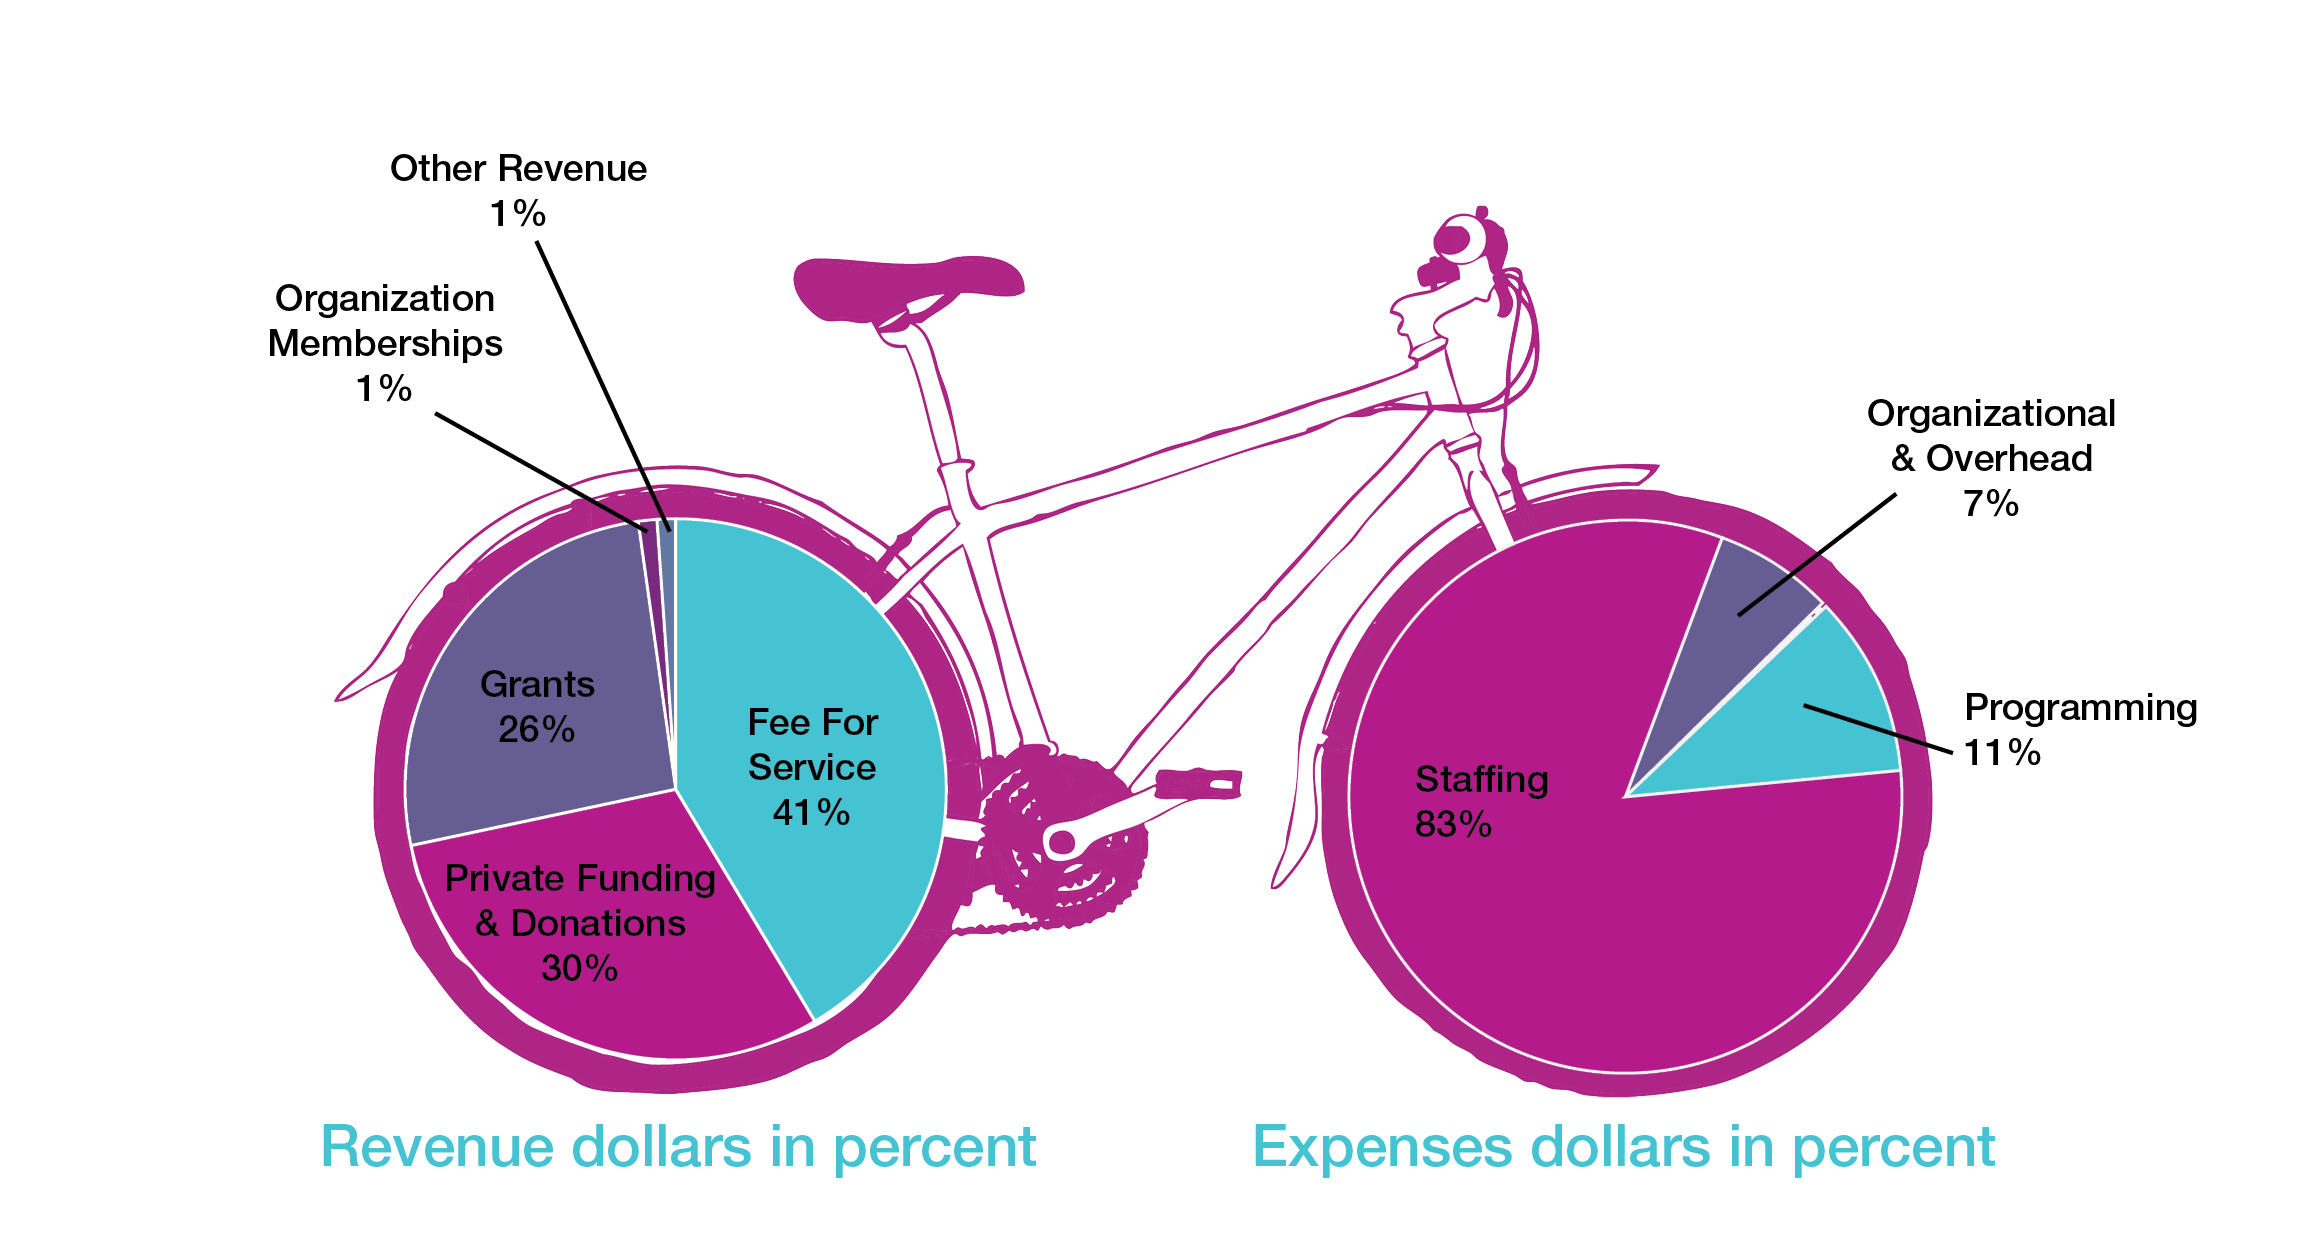 An illustration of a bike. Each wheel represents a pie chart. The back wheel is a pie chart that represents the 2022-23 fiscal year's revenue dollars as a percentage. The front wheel is a pie chart that represents the 2022-23 fiscal year's expenses dollars as a percentage 